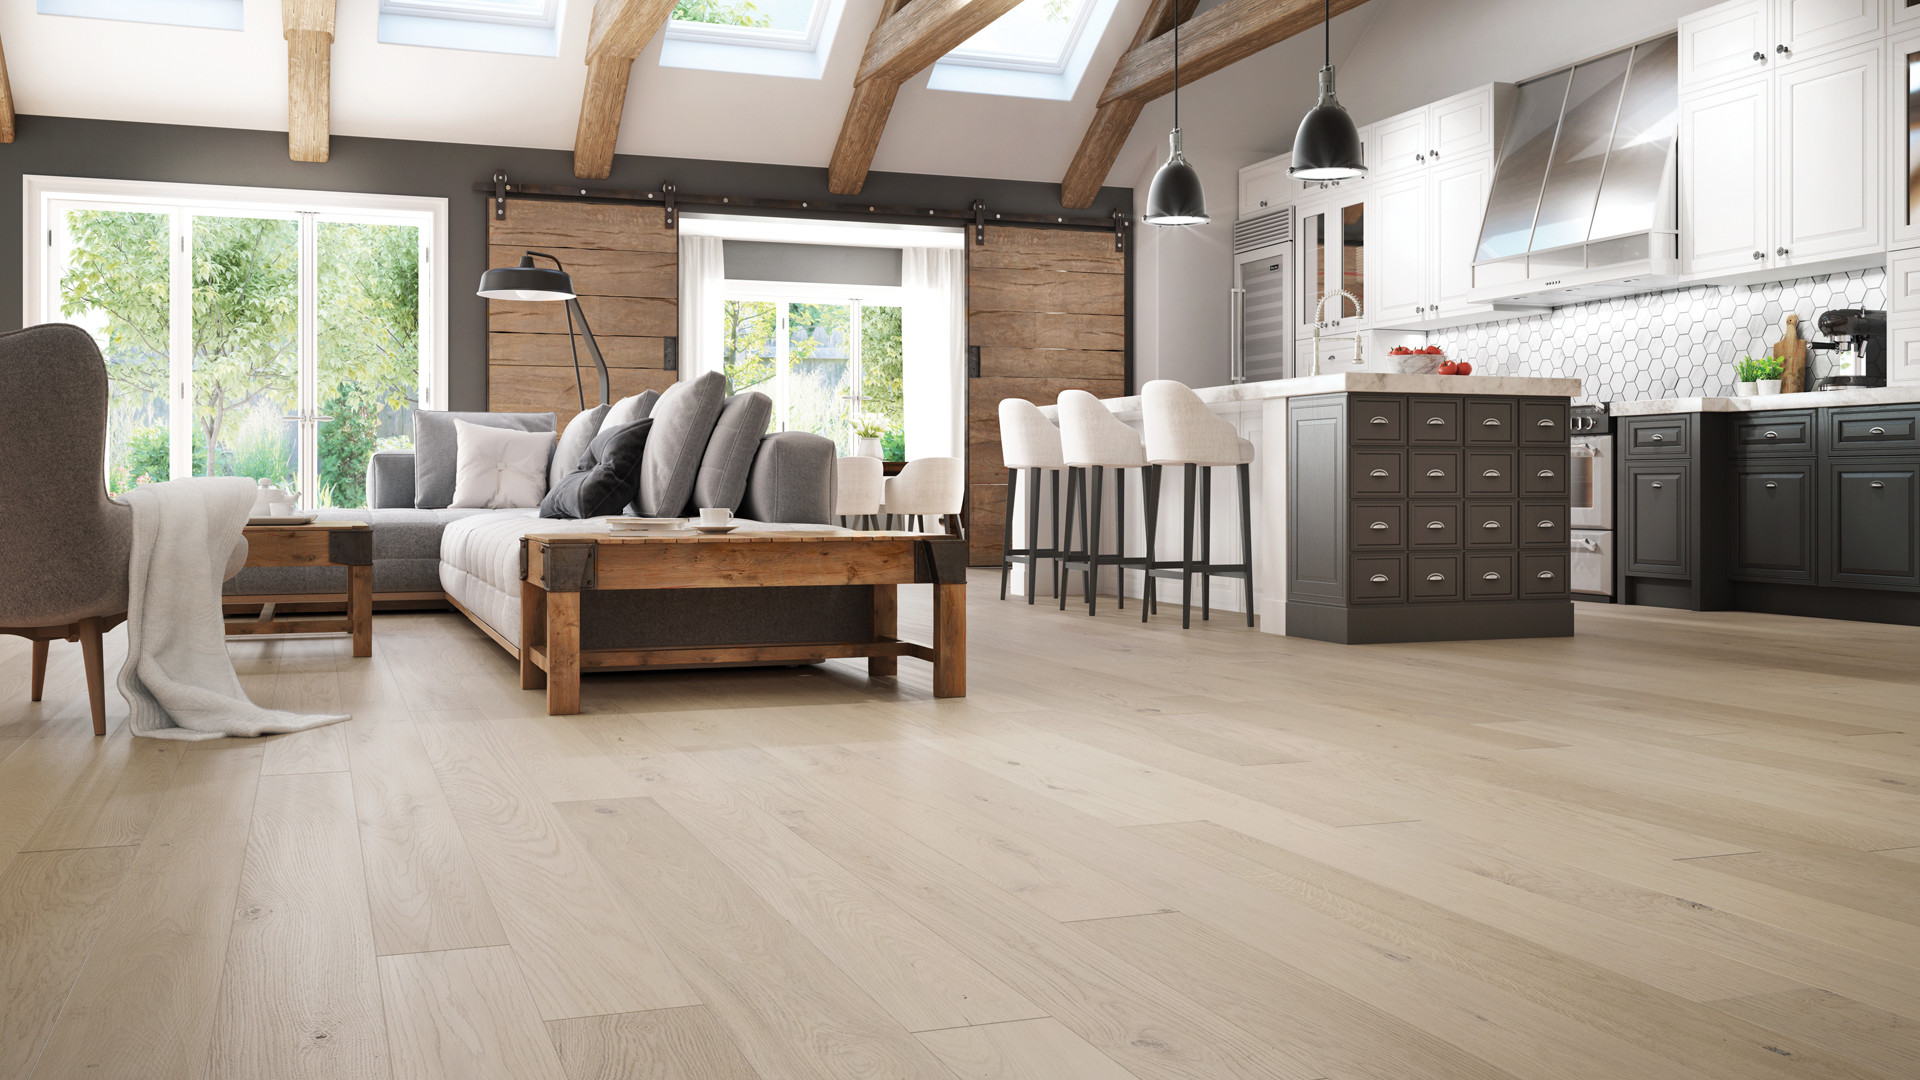 26 Fashionable Quality Engineered Hardwood Flooring 2022 free download quality engineered hardwood flooring of 4 latest hardwood flooring trends of 2018 lauzon flooring for this technology brings your hardwood floors and well being to a new level by improving i